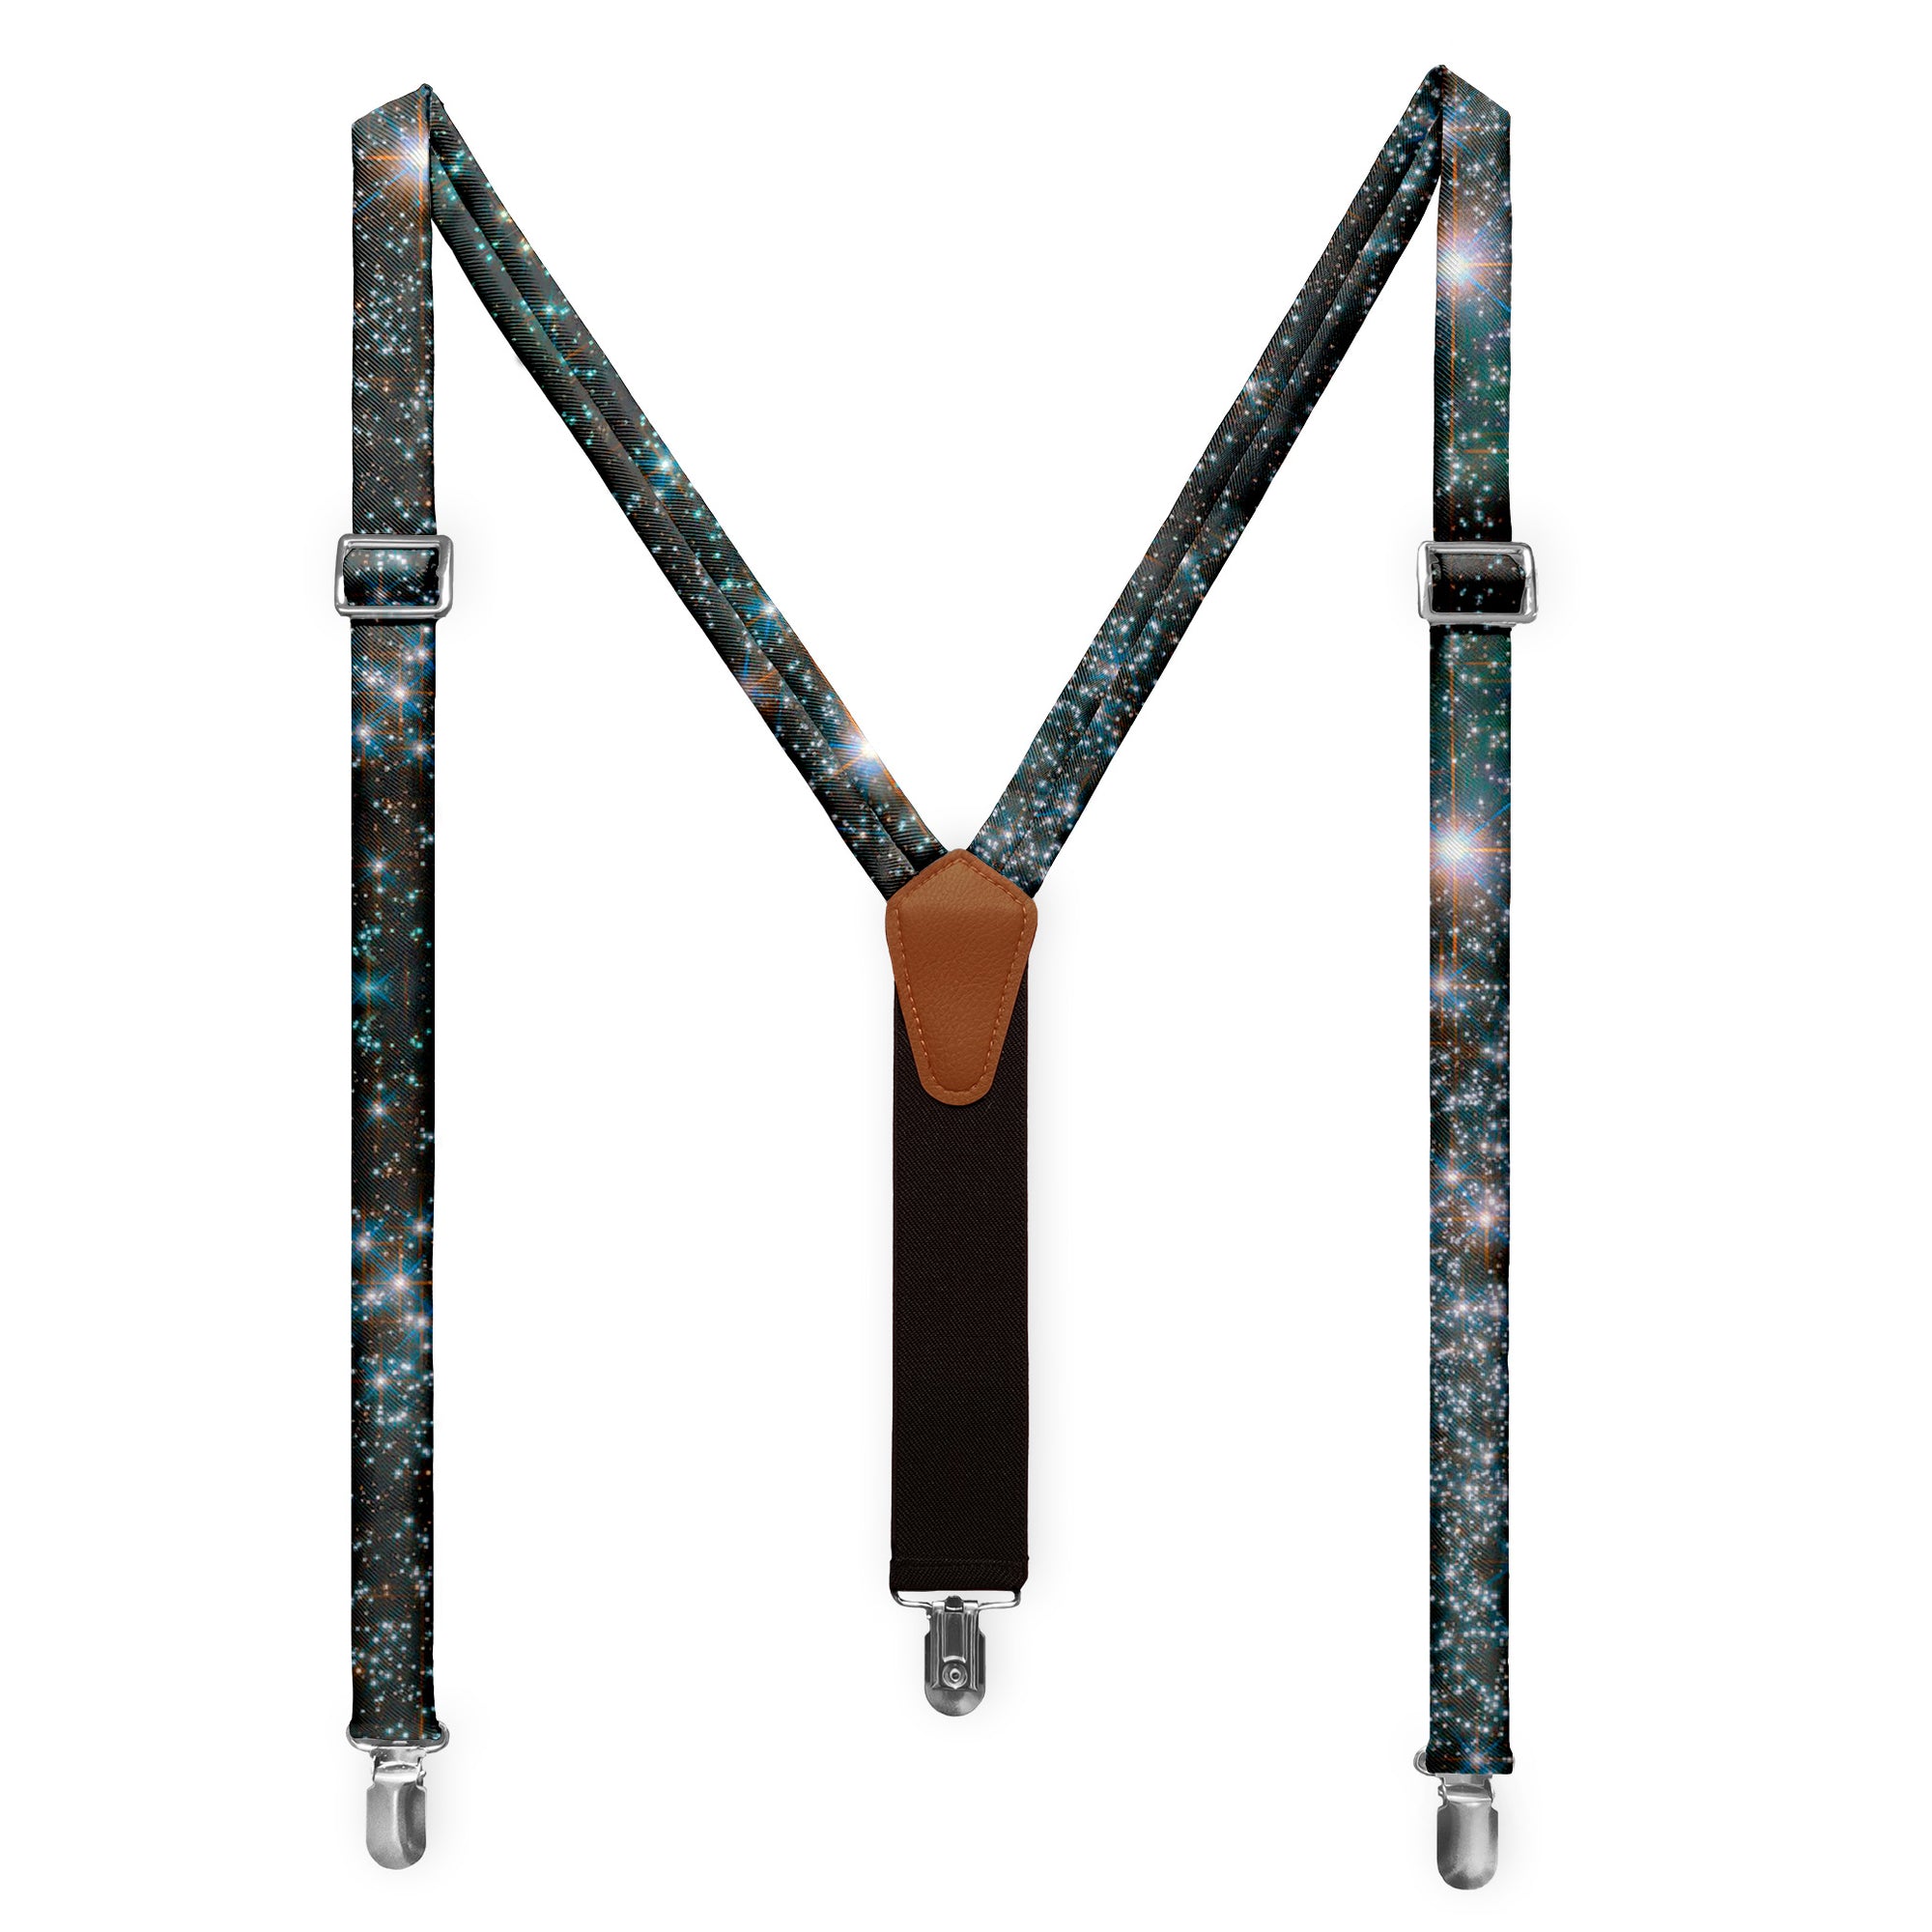 Galaxy Suspenders - Adult Short 36-40" -  - Knotty Tie Co.